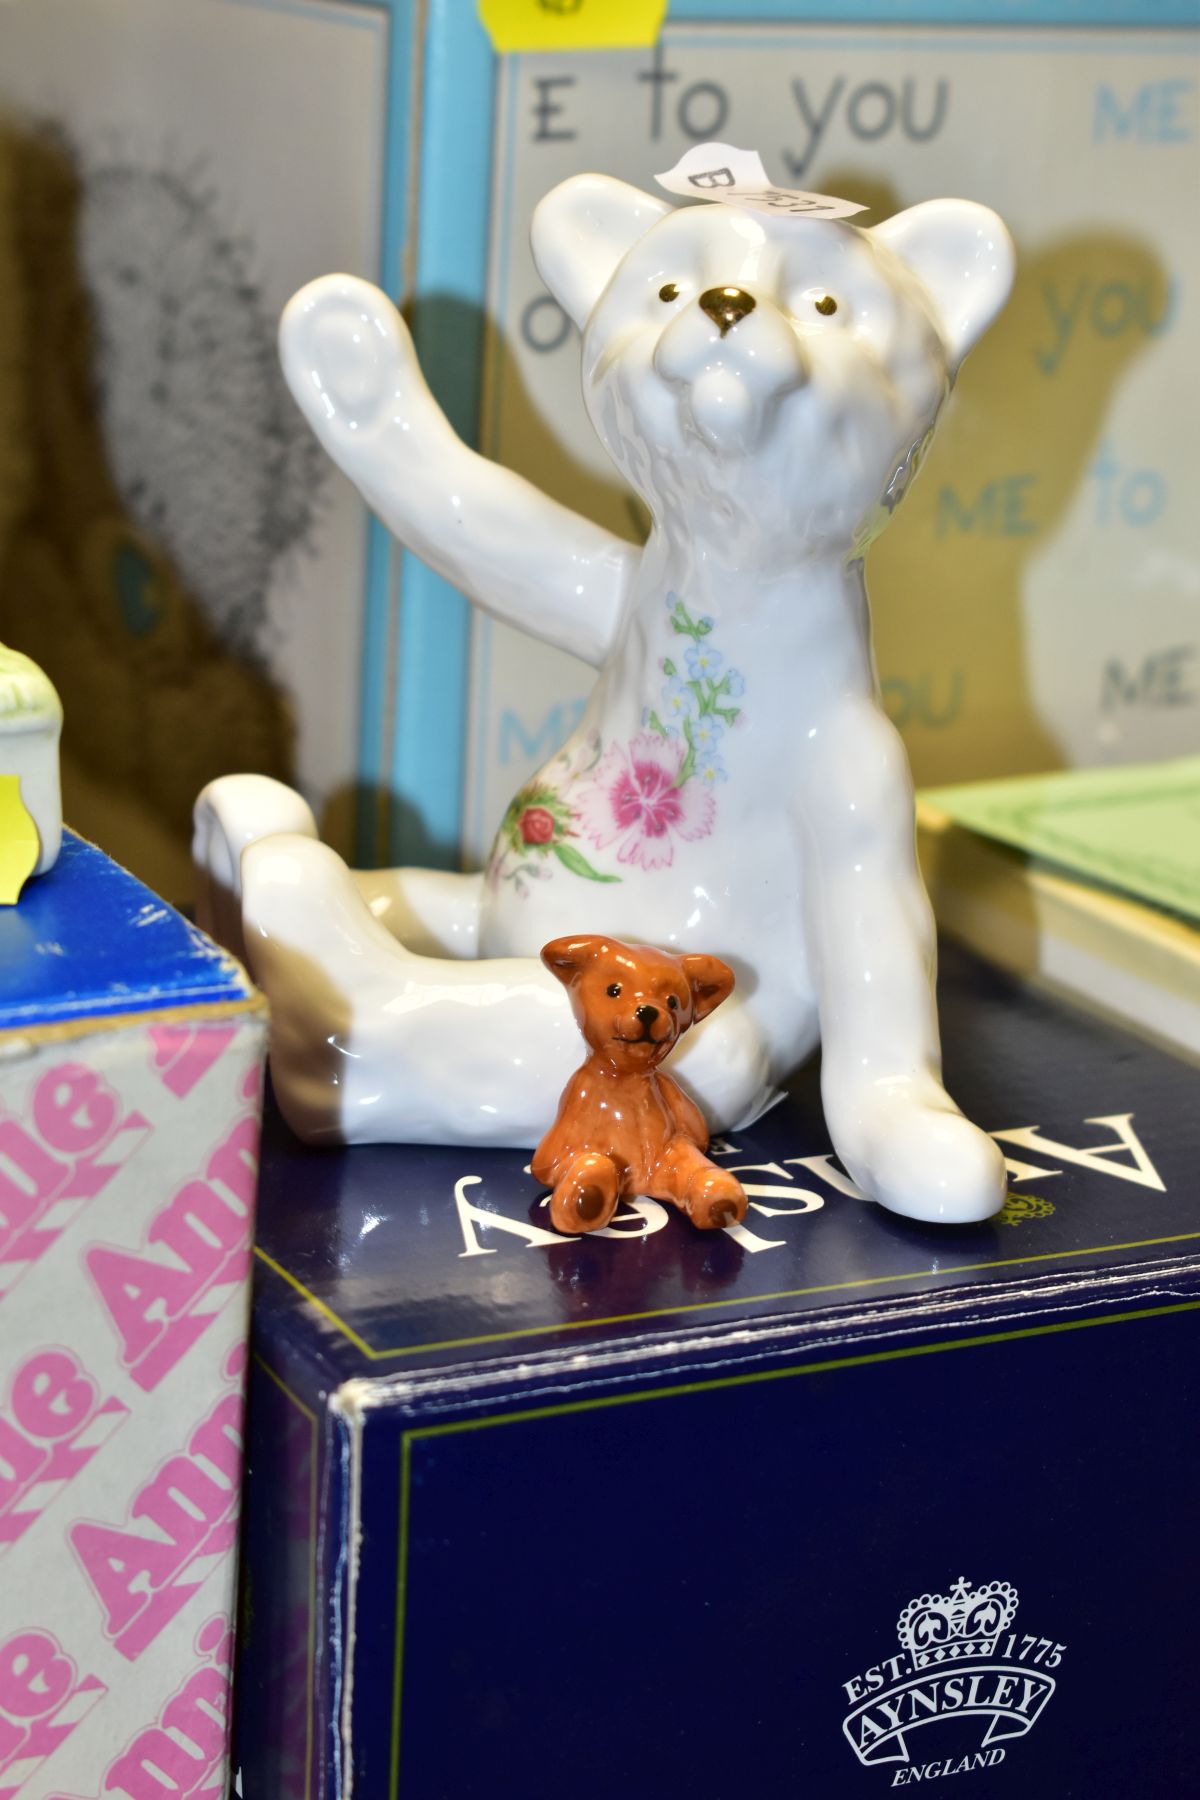 COLLECTABLE ITEMS comprising Wade 'Big Bad Wolf', Applause 'Annie', Aynsley 'Wild Tudor', Teddy with - Image 12 of 15